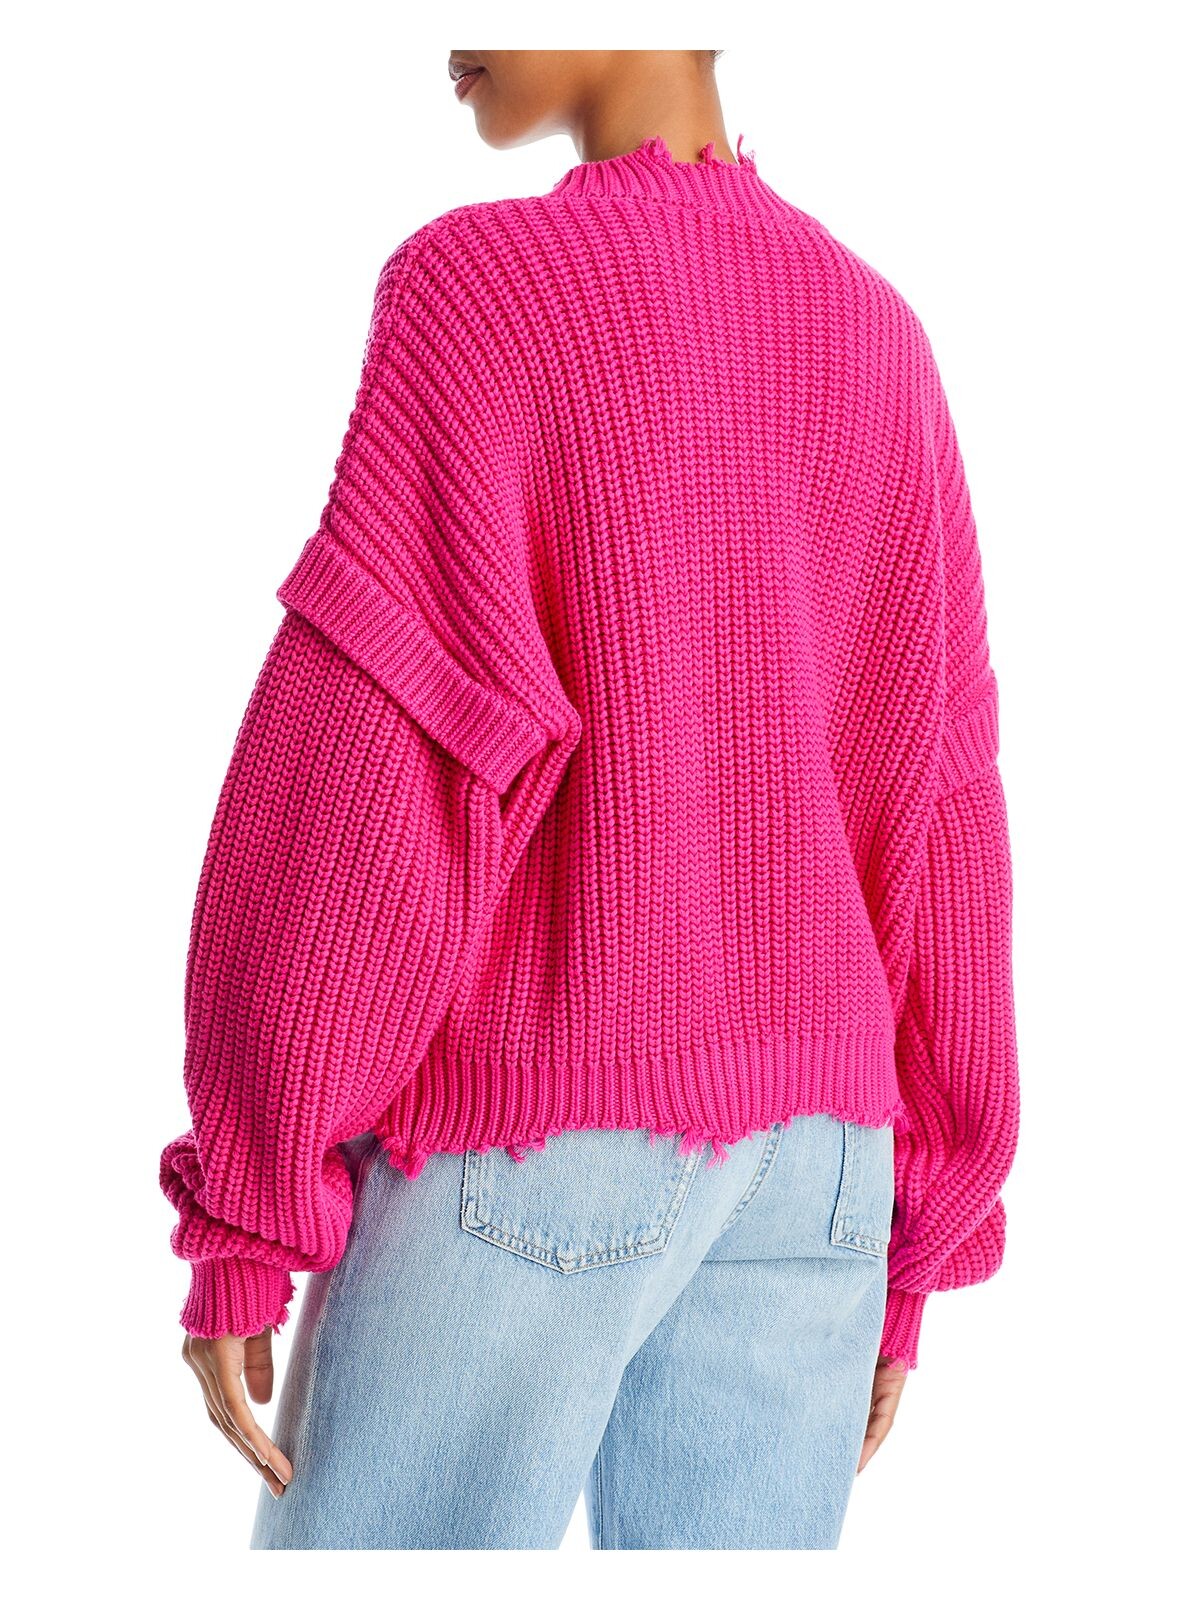 SIMON MILLER Womens Pink Distressed Ribbed Long Sleeve V Neck Sweater S